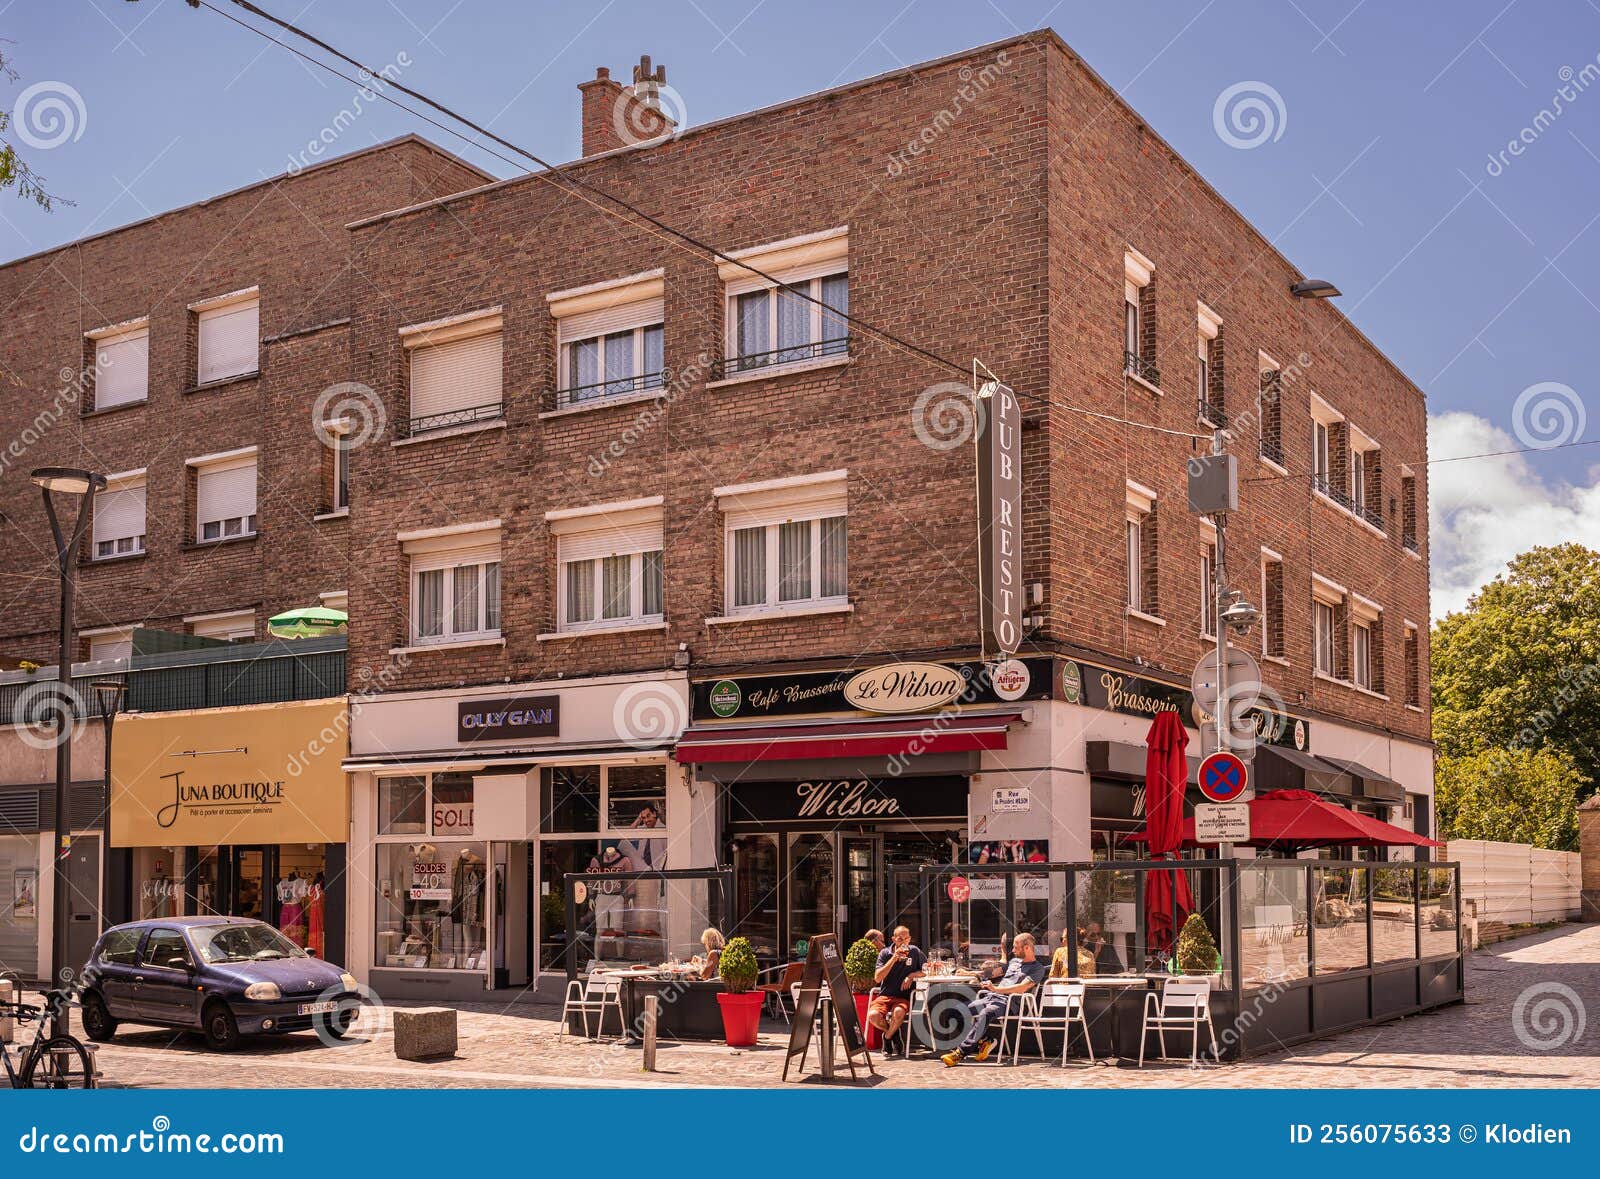 https://thumbs.dreamstime.com/z/europe-france-dunkerque-july-le-wilson-popular-pub-brasserie-neighbor-clothing-stores-boutiques-rue-du-president-flat-256075633.jpg